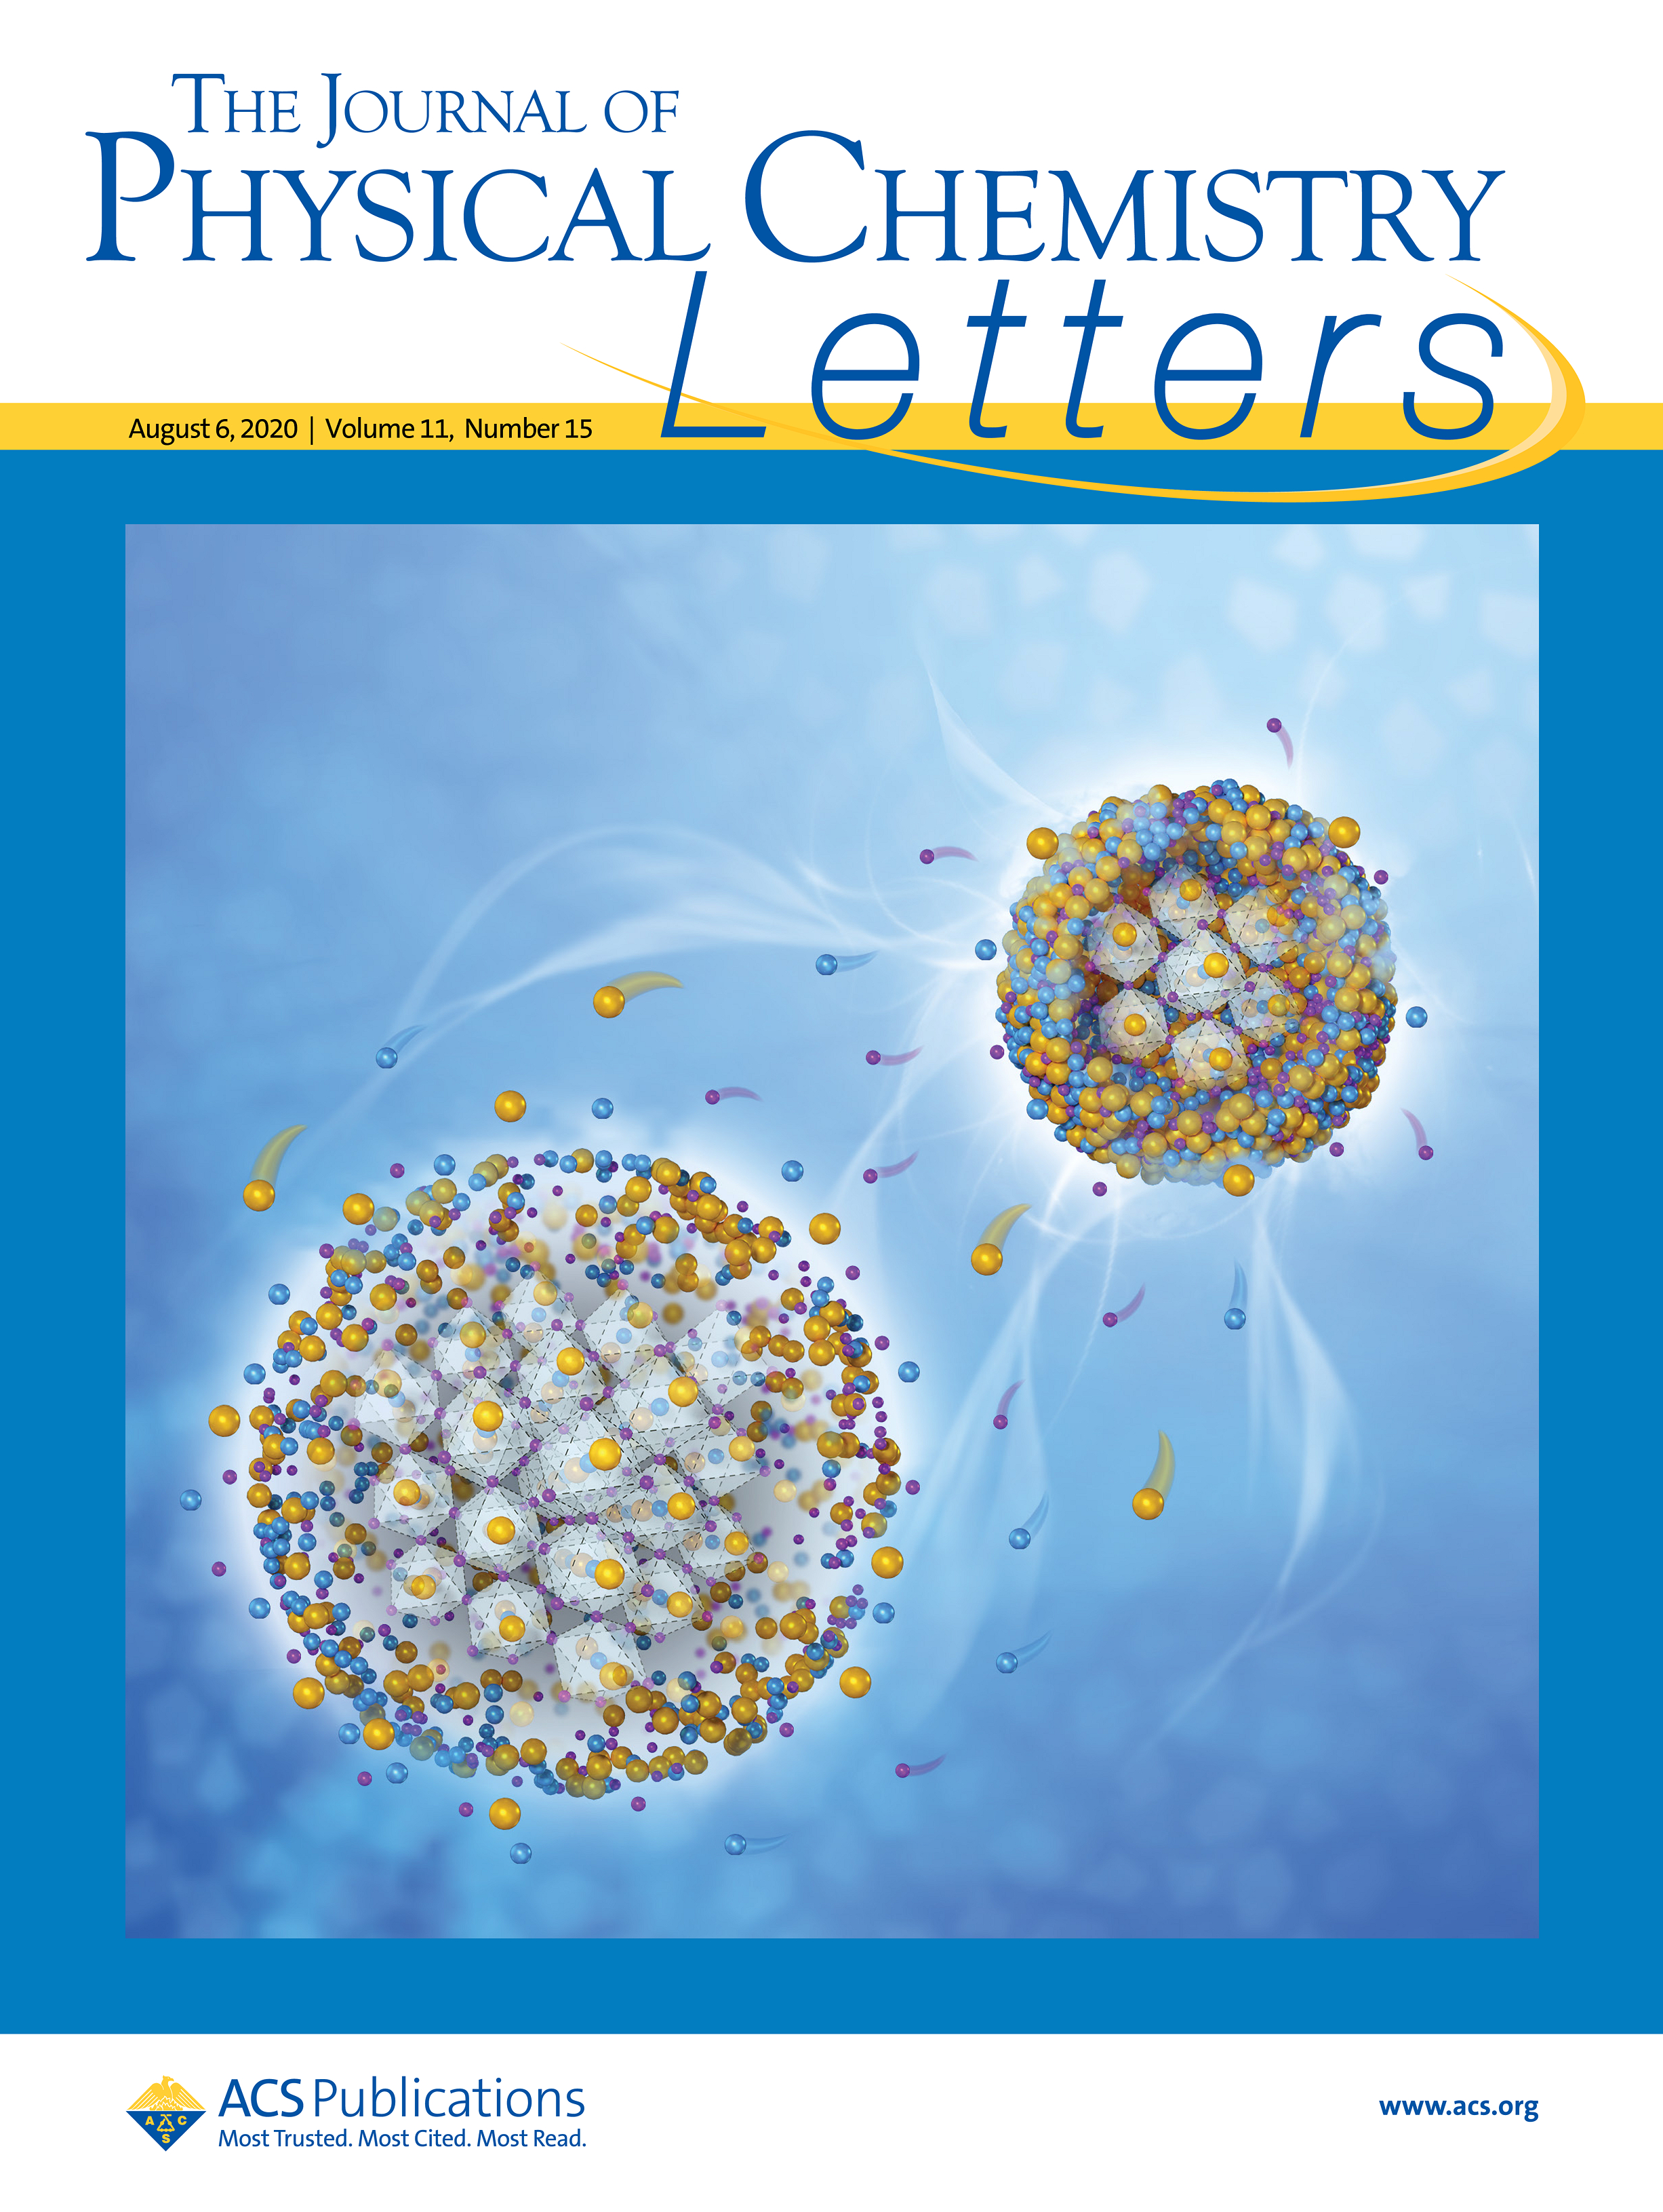 Research Creative Illustration, Journal Cover Art Design, The Journal of Physical Chemistry Letters